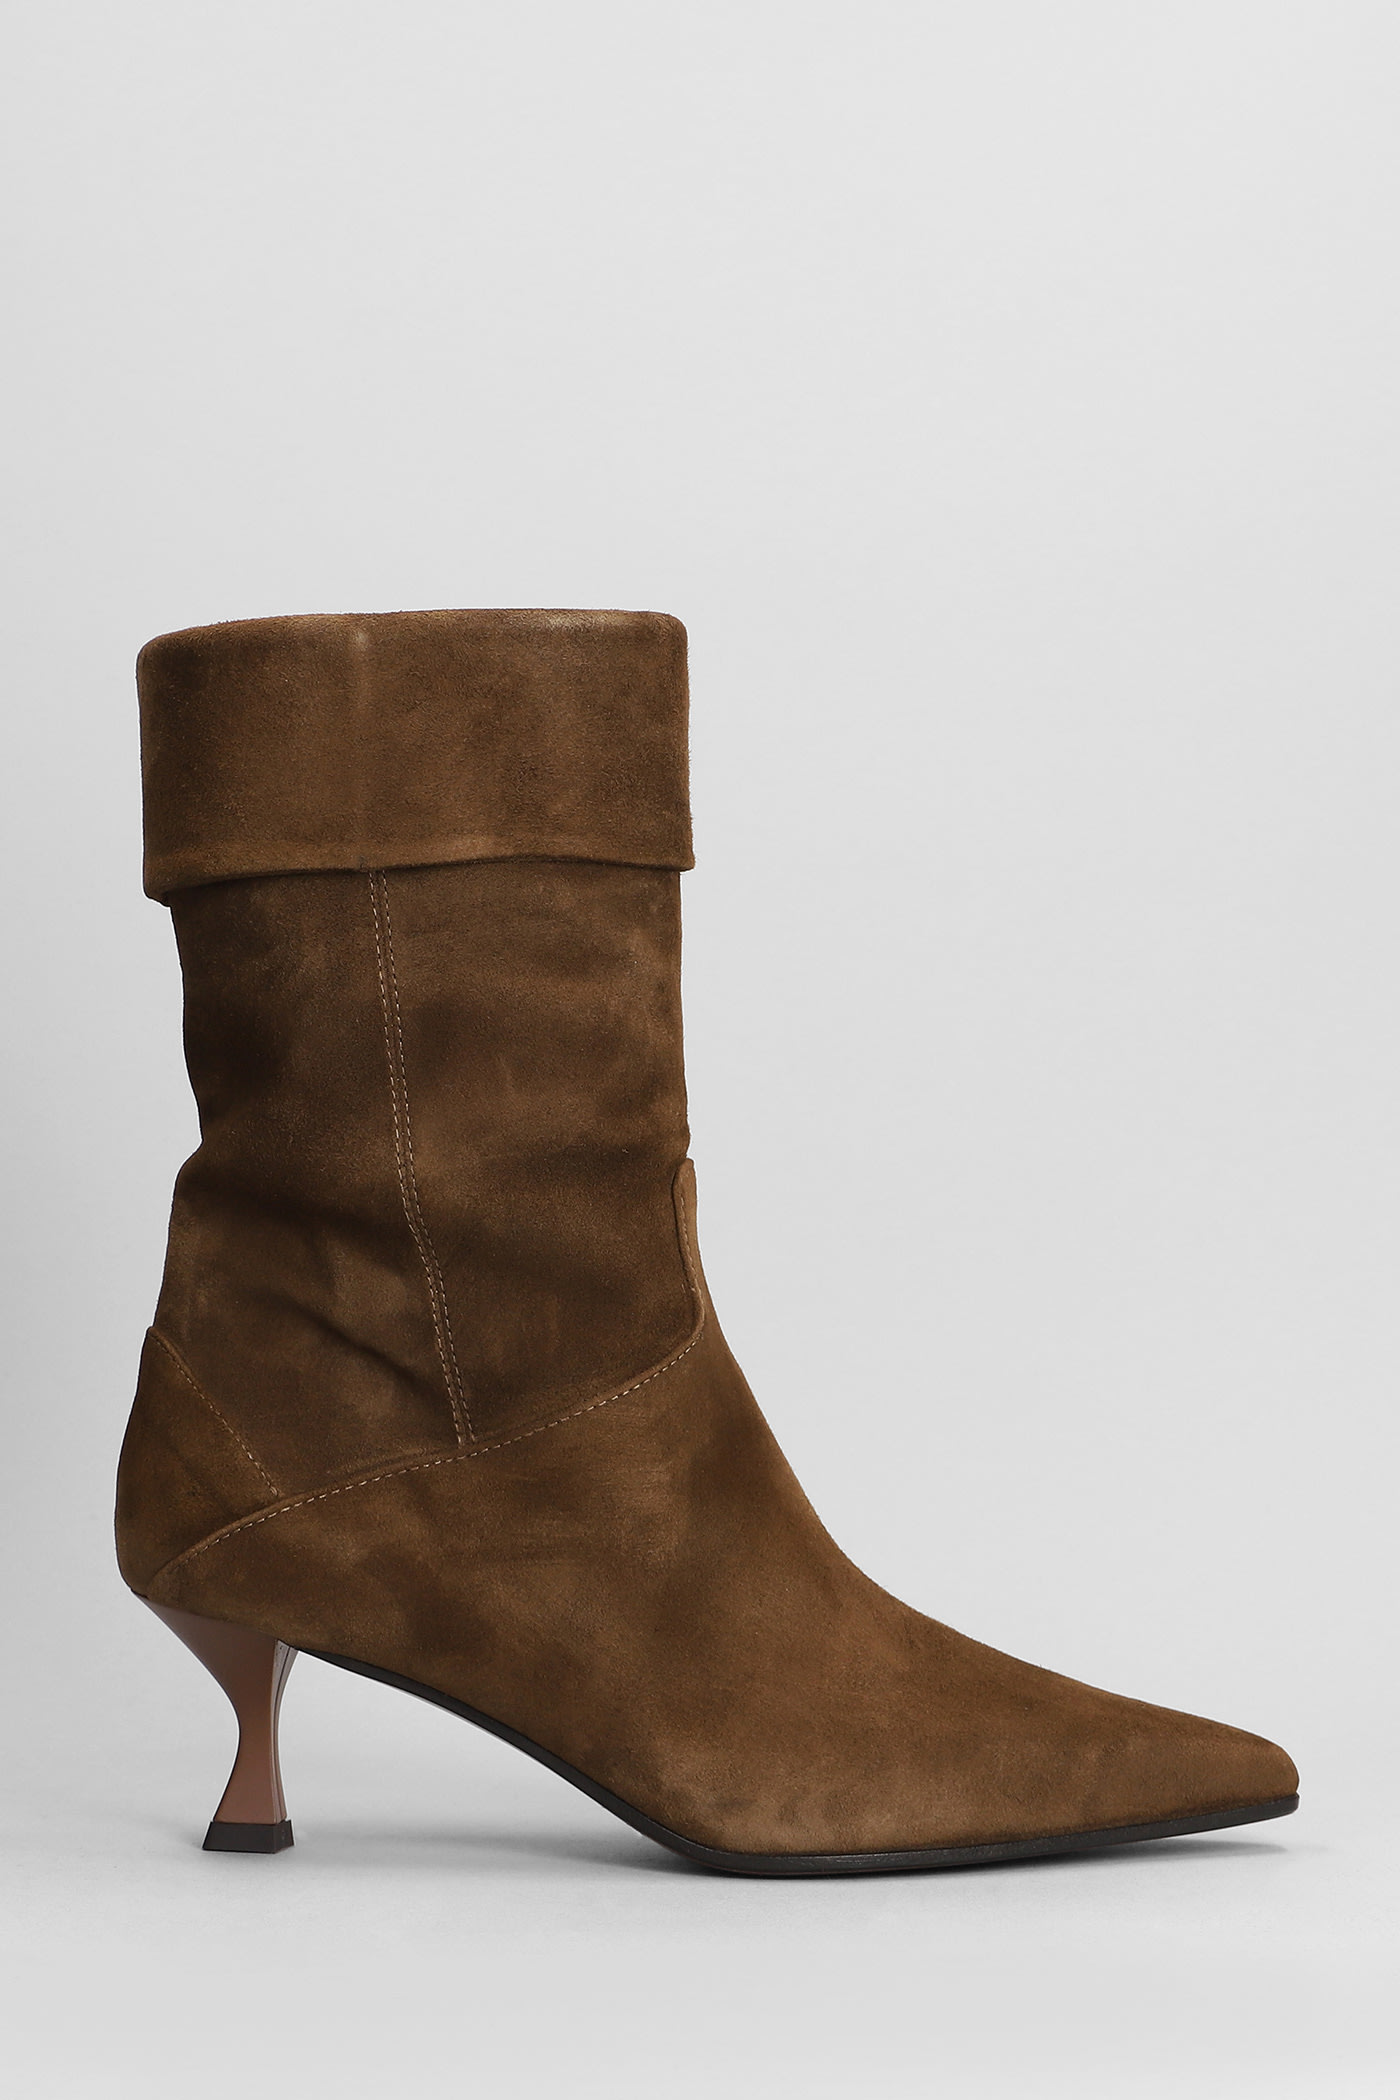 High Heels Ankle Boots In Brown Suede